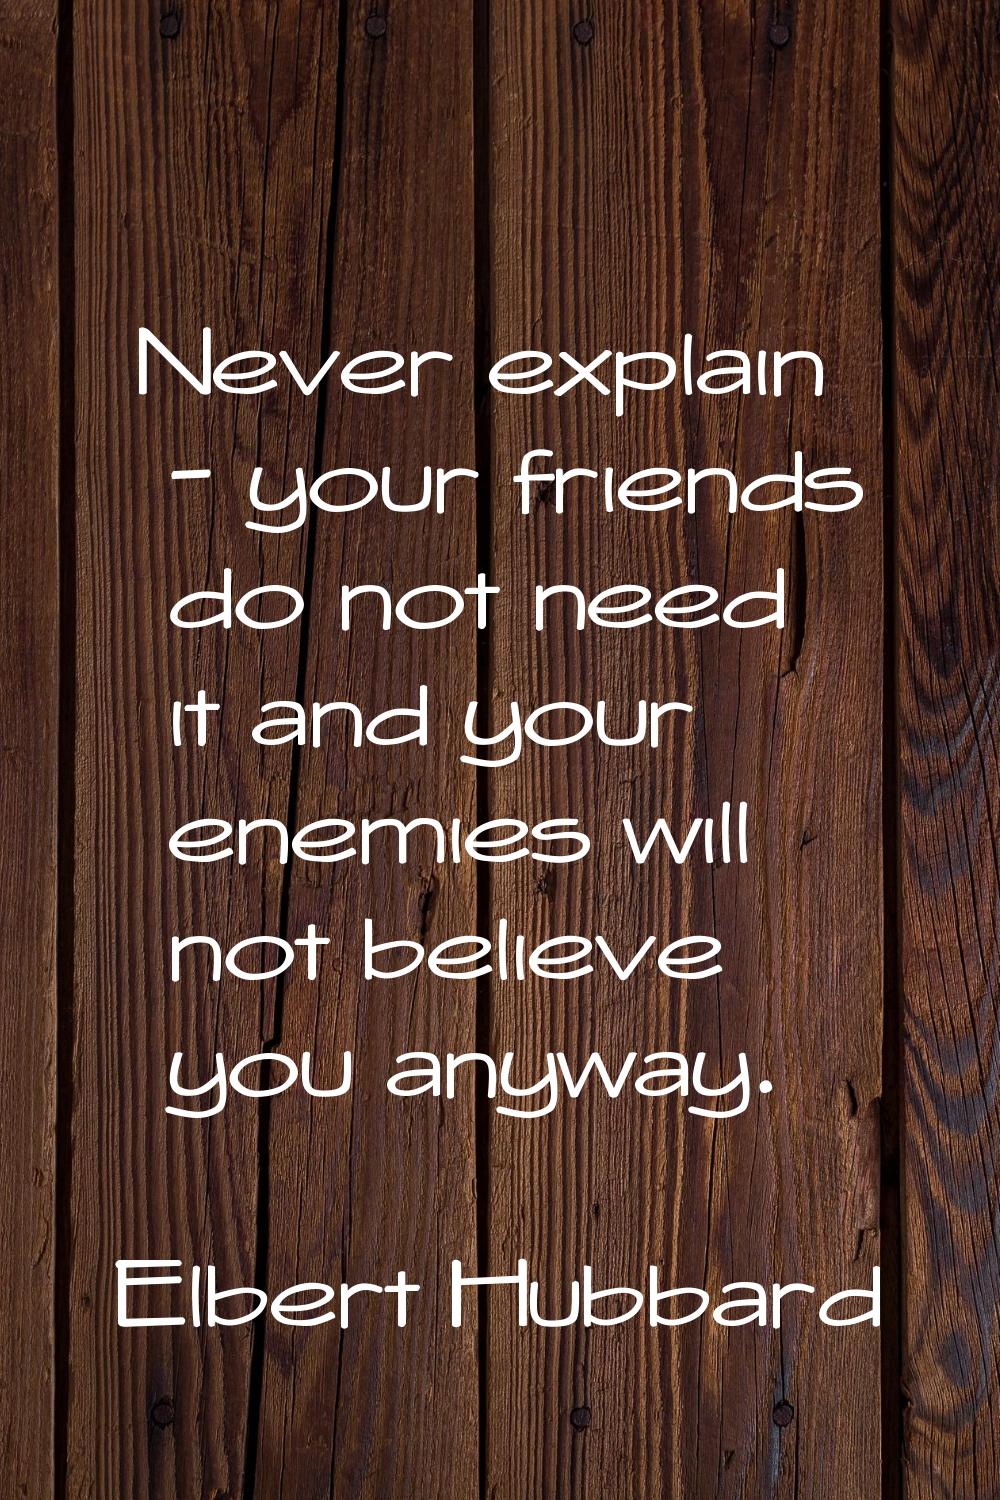 Never explain - your friends do not need it and your enemies will not believe you anyway.